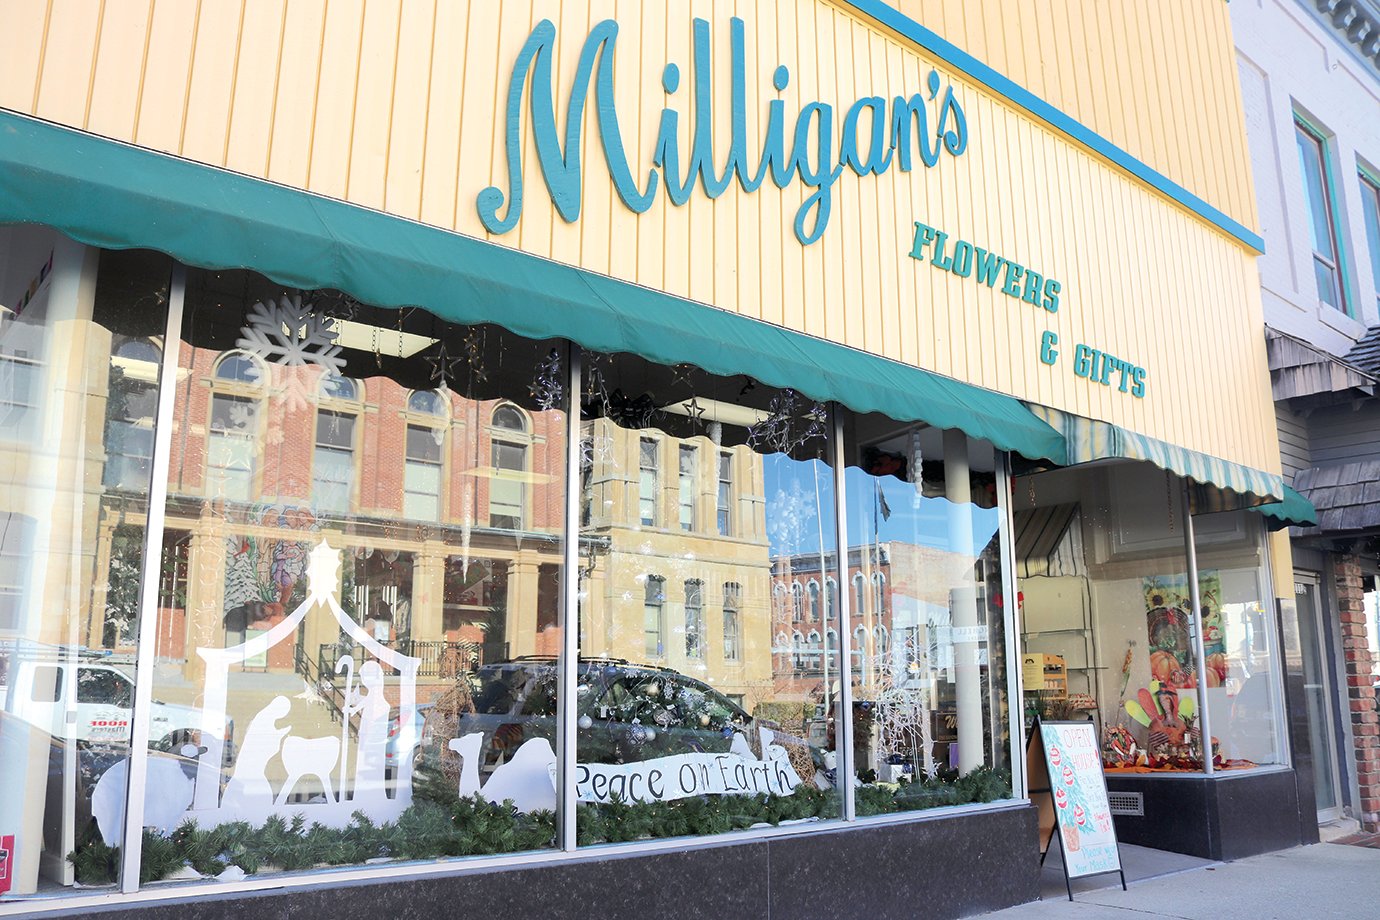 Milligan's Flowers & Gifts in downtown Crawfordsville is one of many similar shops holding open houses Friday, Nov. 13 through Saturday, Nov. 14. Sales extend through 7 p.m. today at Milligan's, Country Hearts & Flowers, Just Because Flowers, In His Time, Reclaimed by Grace, Four Seasons Local Market, the Carnegie Museum Gift Shop, Athens Arts Gallery and Heathcliff.